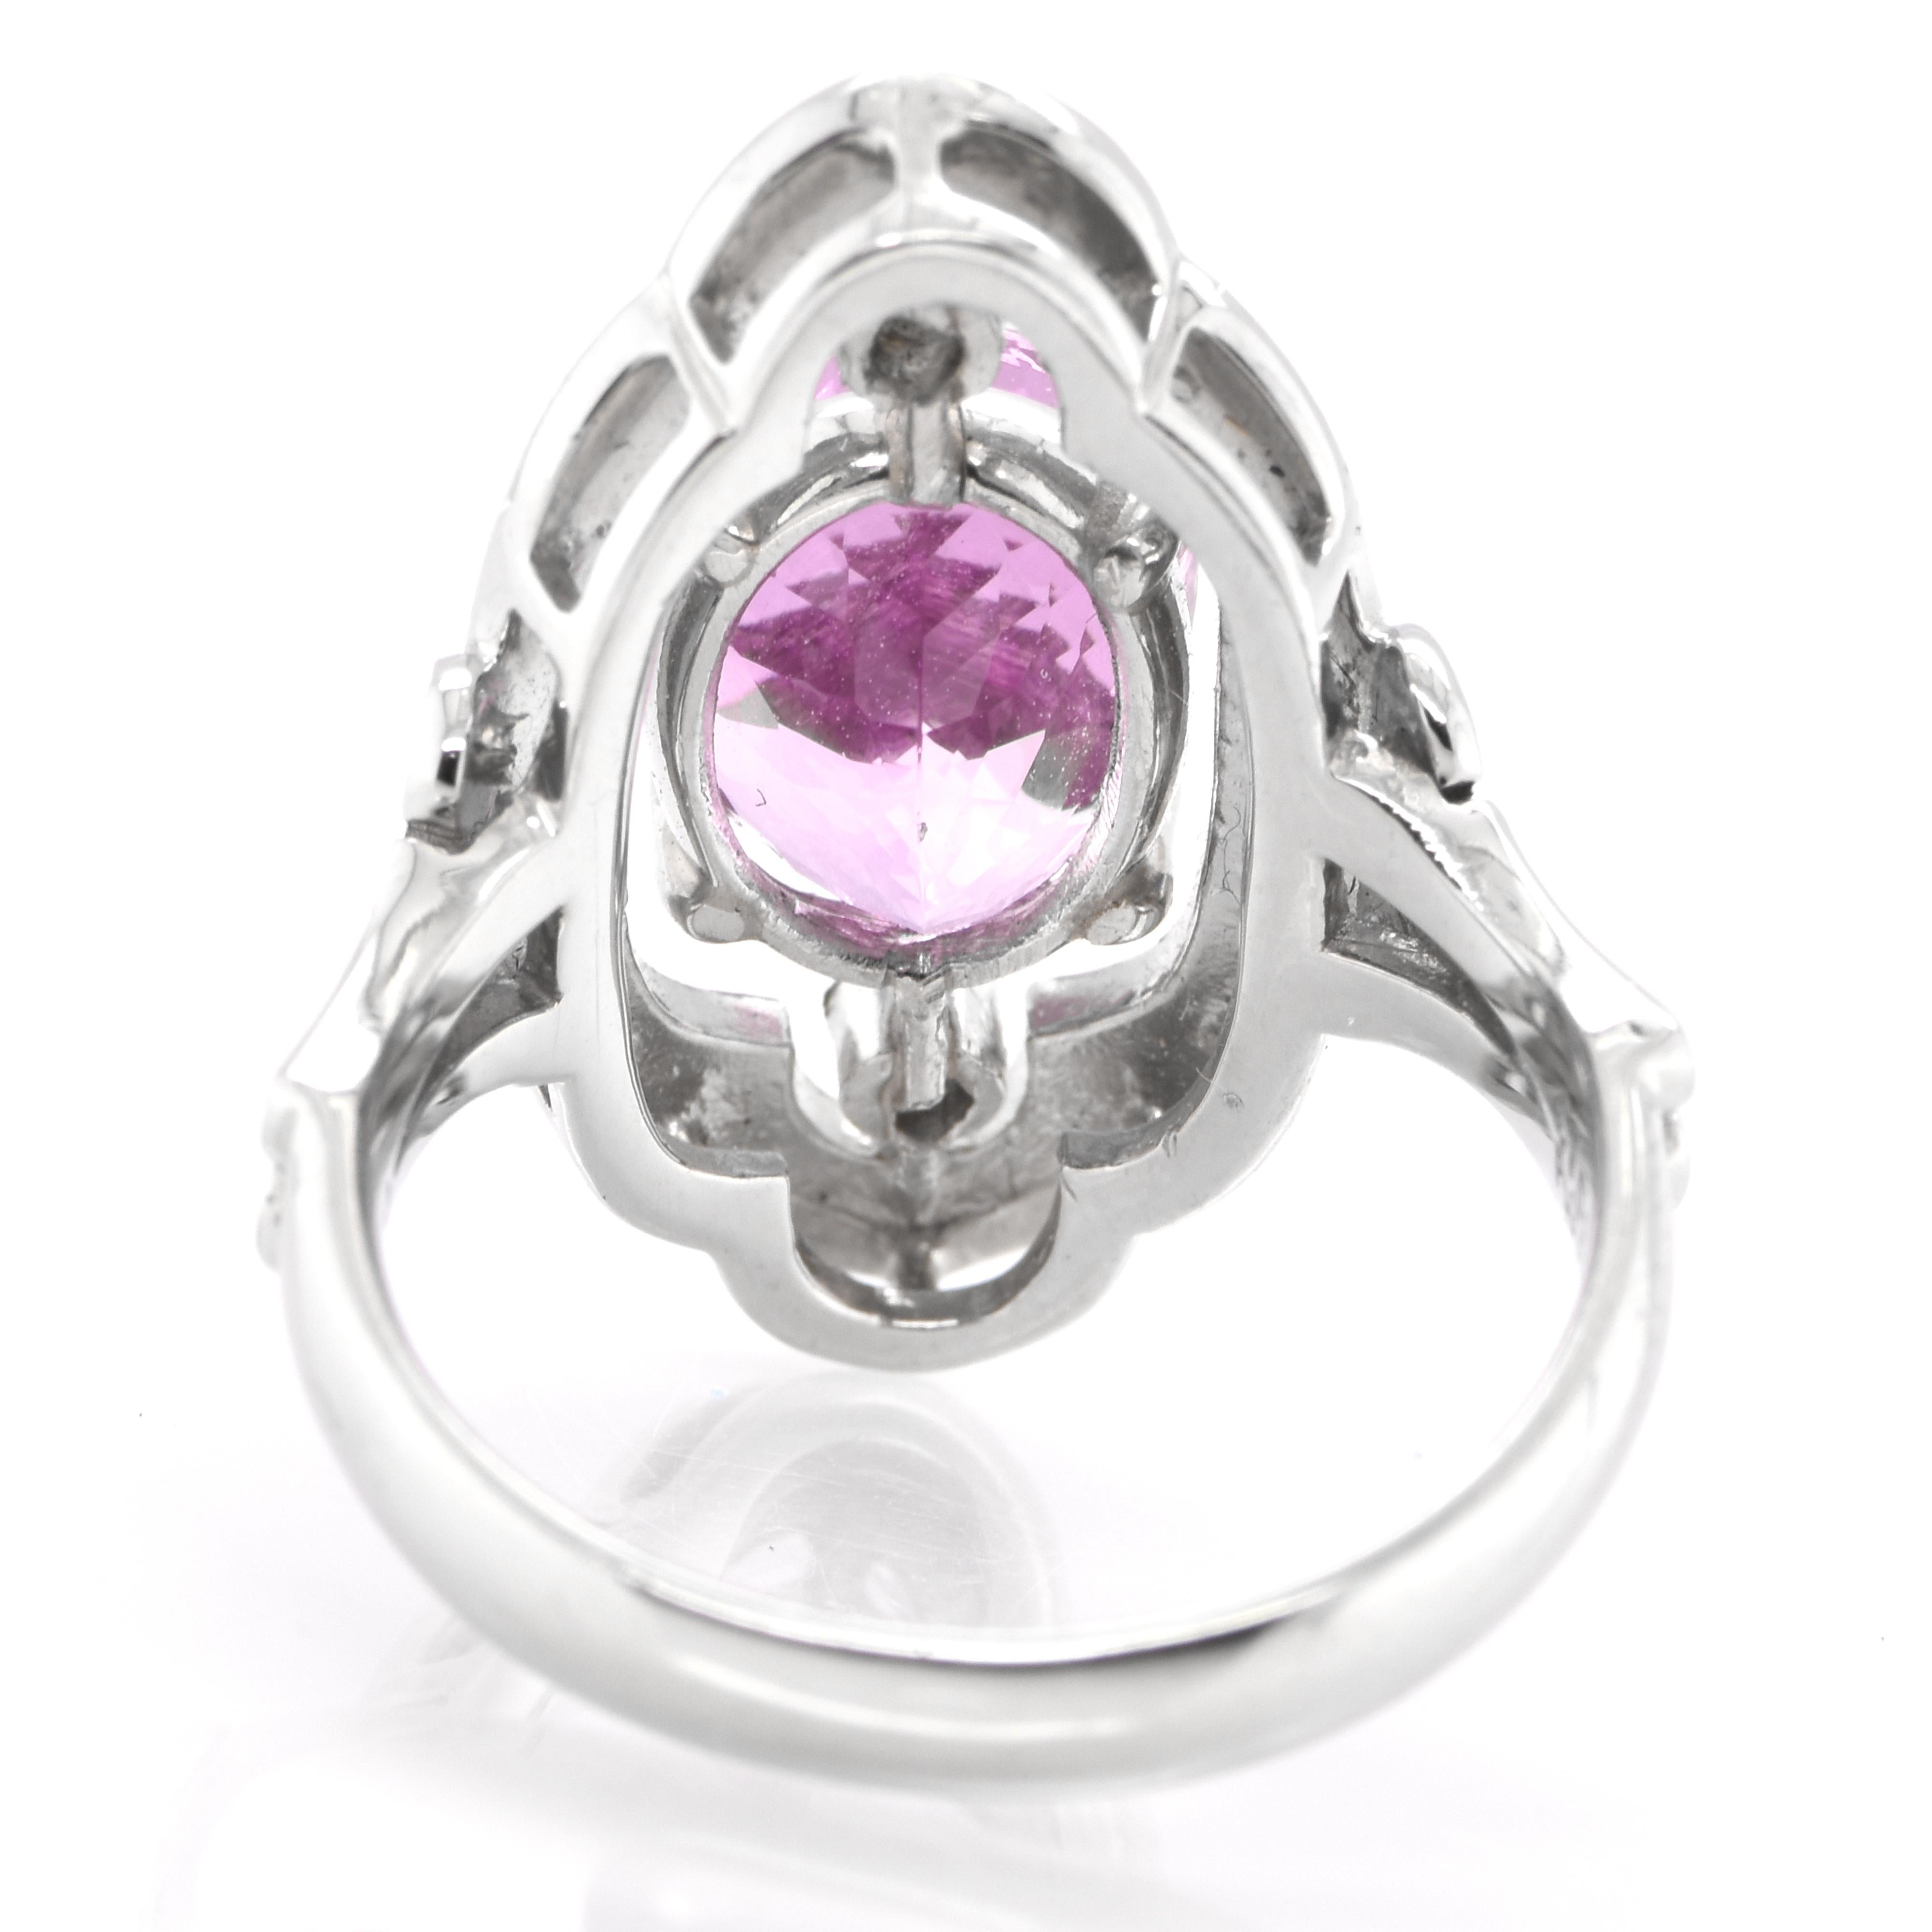 Art Deco Style 4.15 Carat Natural Pink Topaz and Diamond Ring Set in Platinum 1